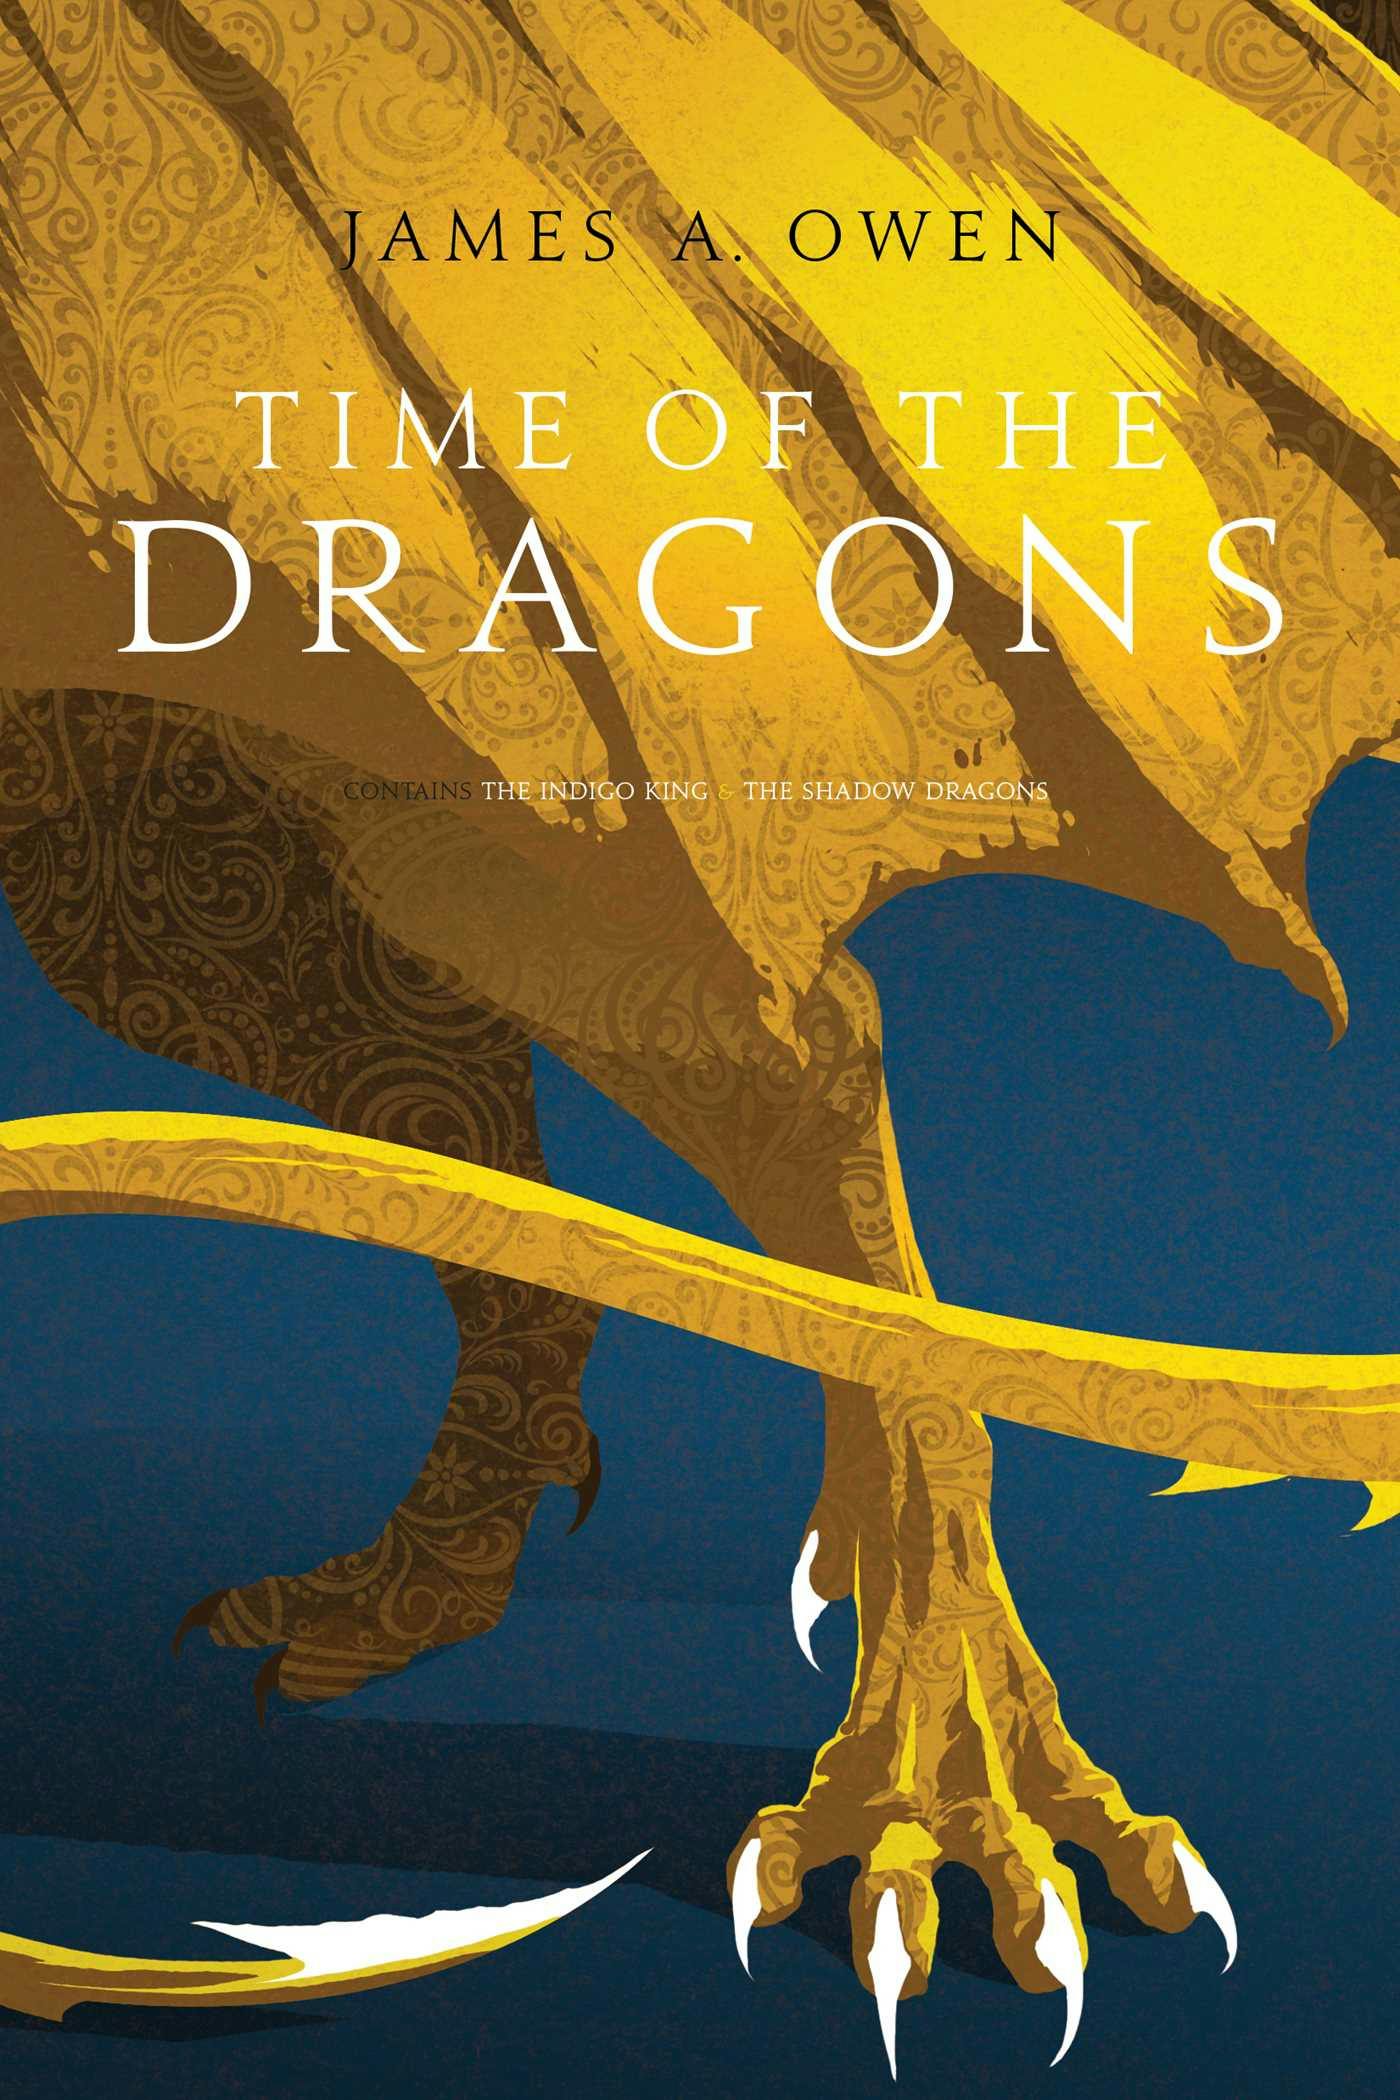 Time of the Dragons: The Indigo King; The Shadow Dragons - James A. Owen